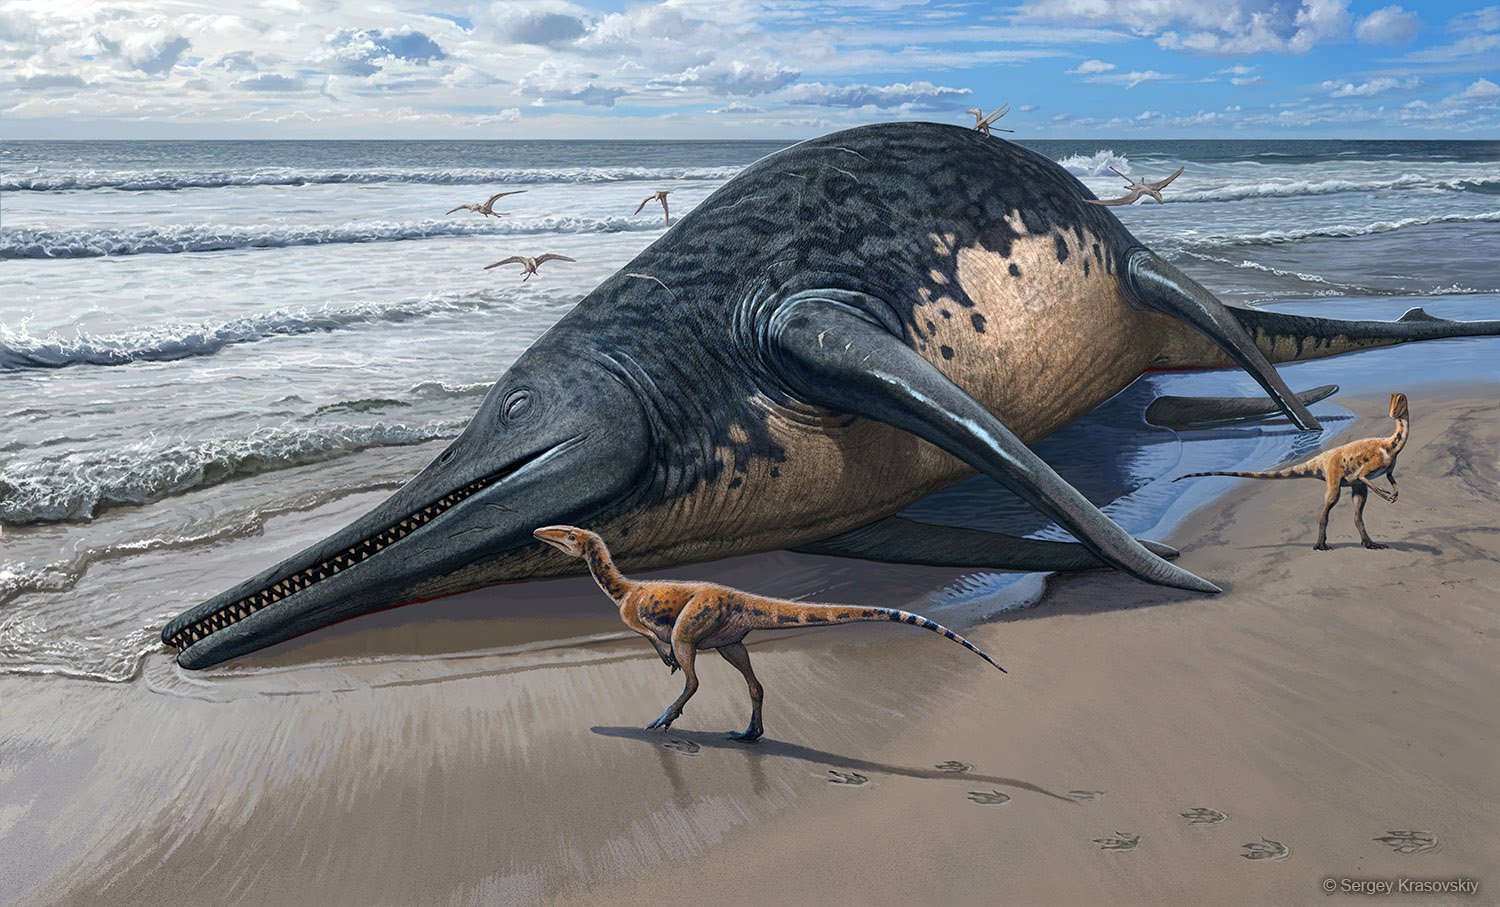 Scientists Discover 82-Feet-Long Ancient “Giant Fish Lizard” in the UK